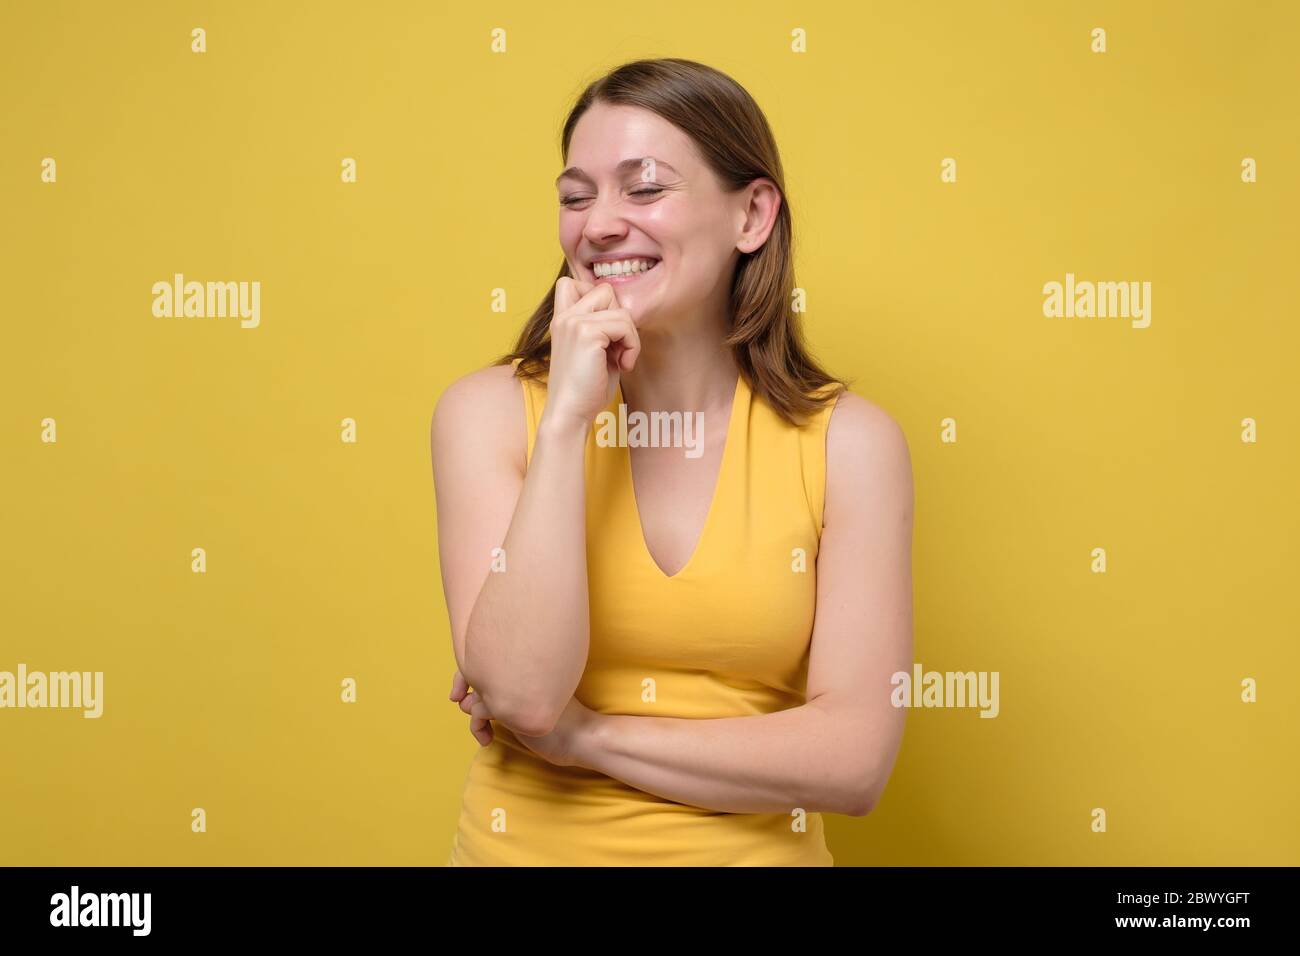 Joyful friendly looking woman laugh out loud not hiding emotions giggling hear funny hilarious joke from friend. Studio shot on yellow wall. Stock Photo